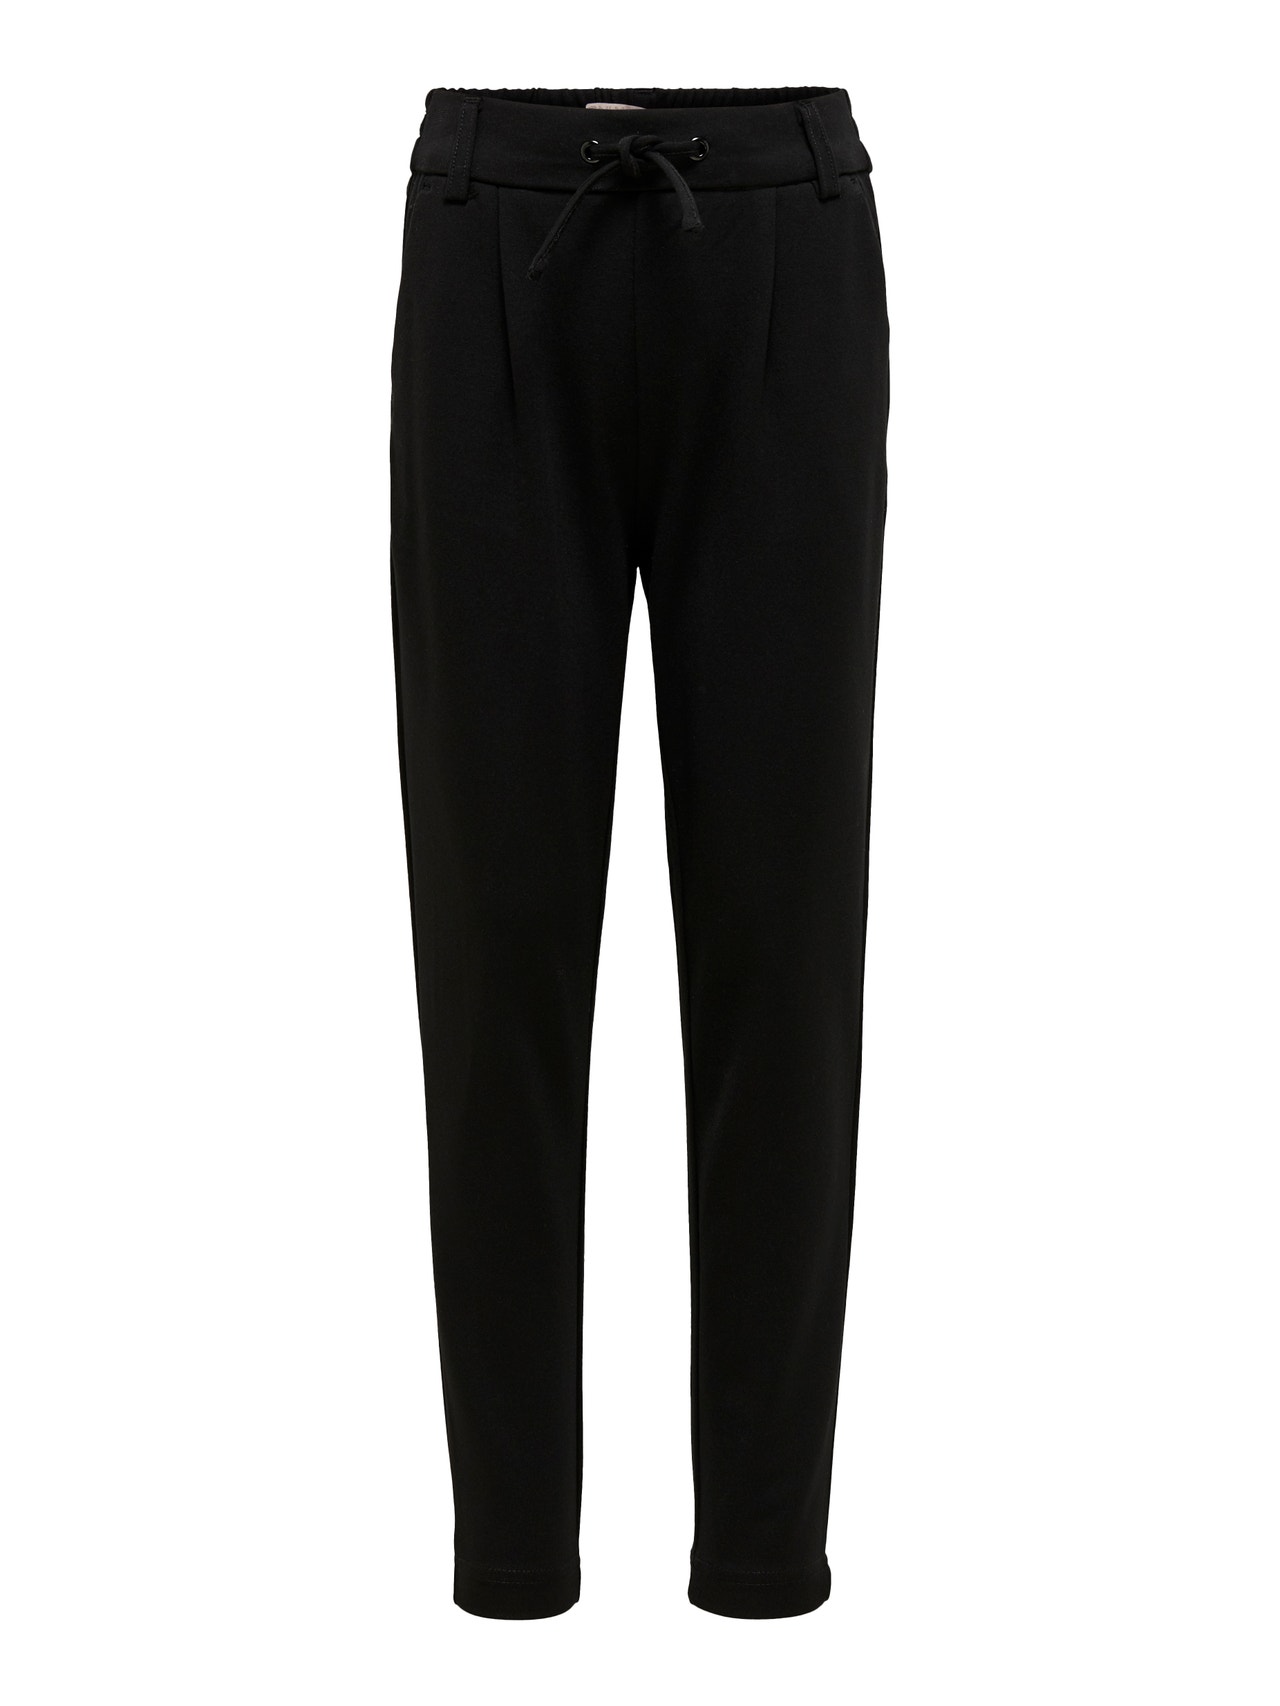 ONLY Regular Fit Trousers -Black - 15183864